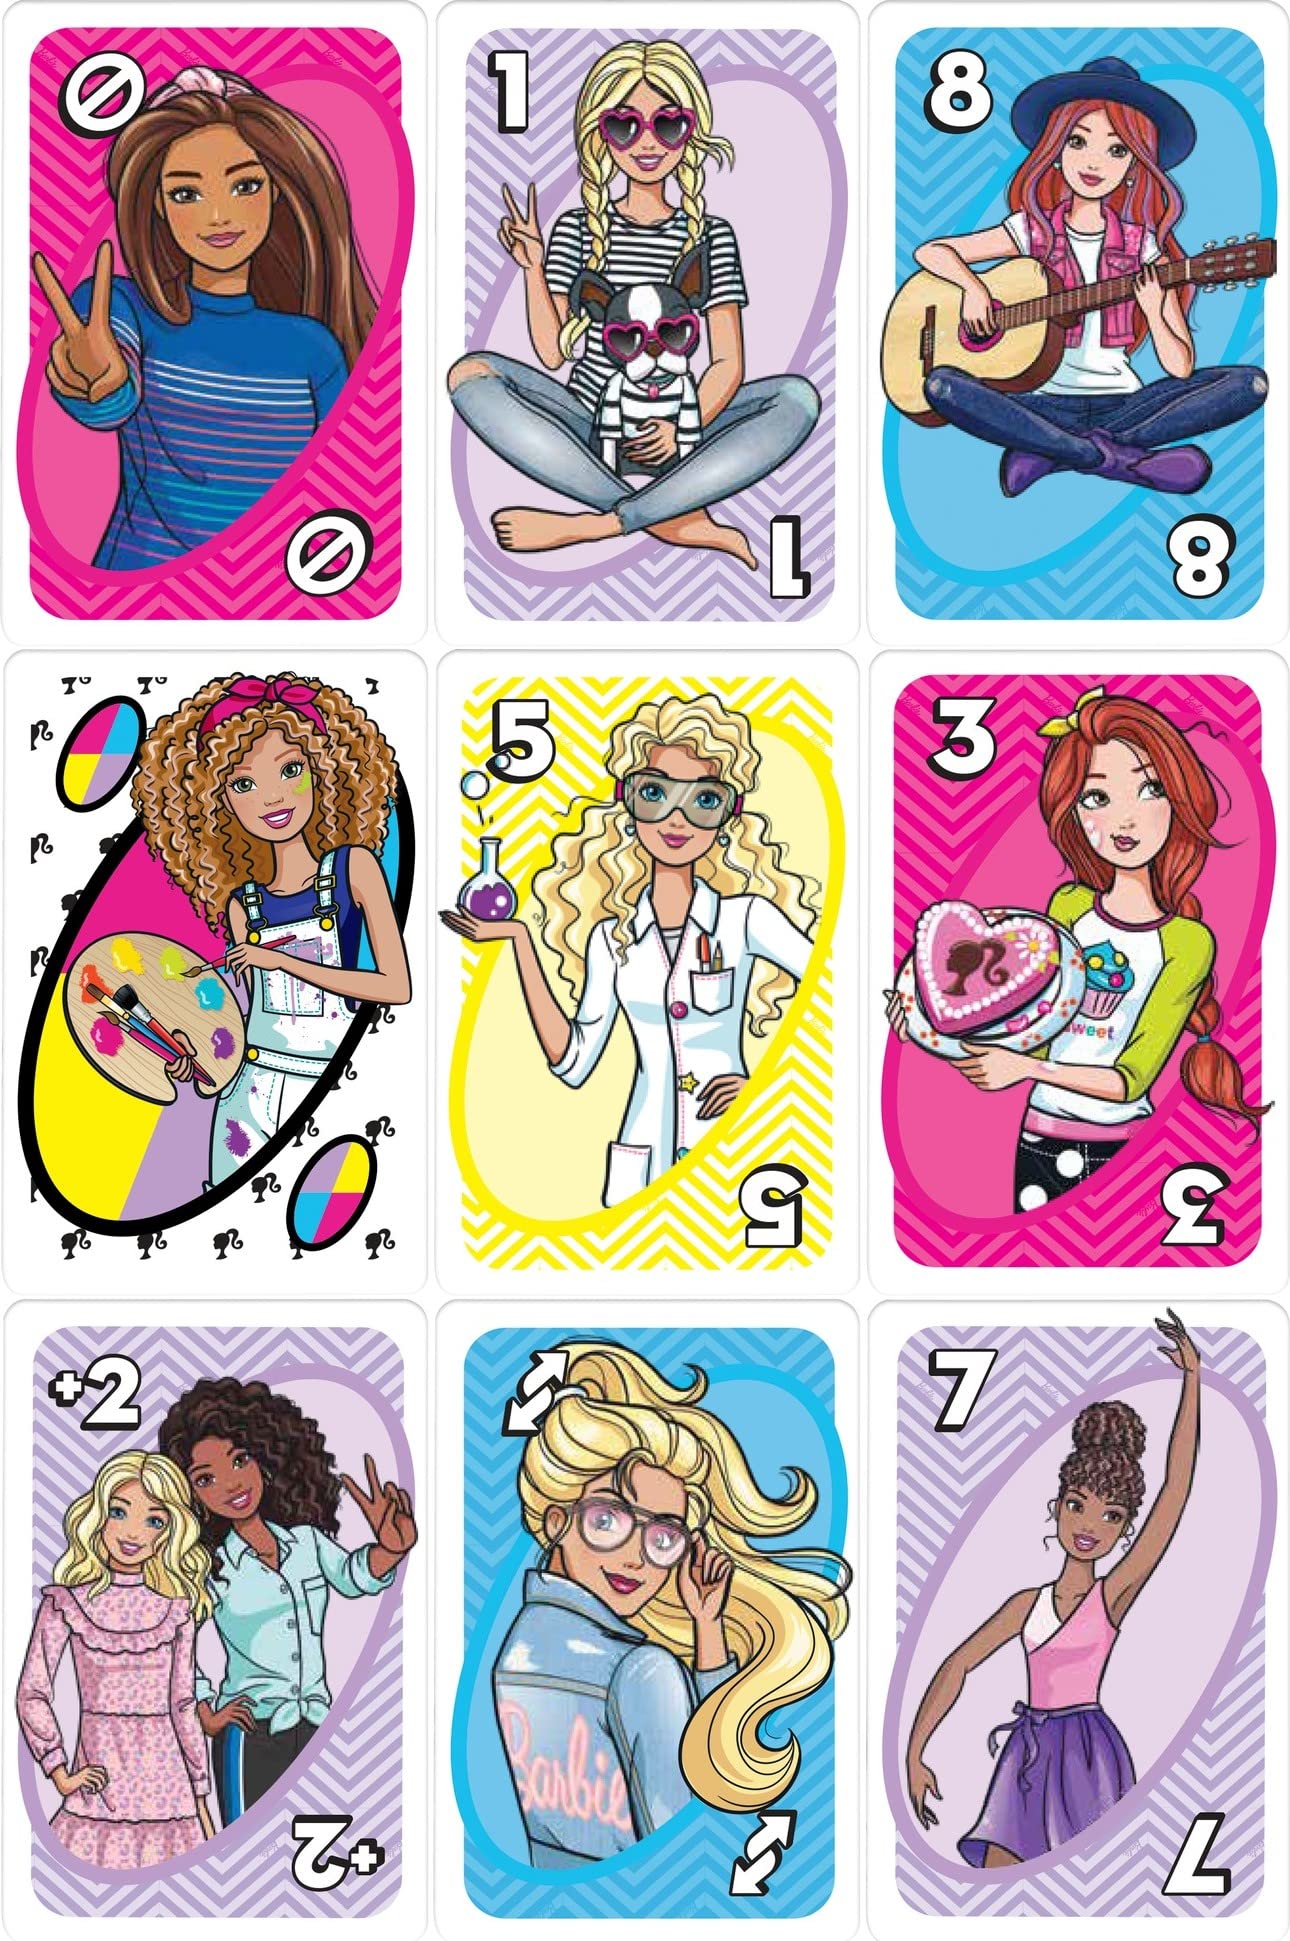 Barbie UNO Card Game for Family Night, Travel Game Featuring Barbie Graphics & Special Rule for 2-10 Players